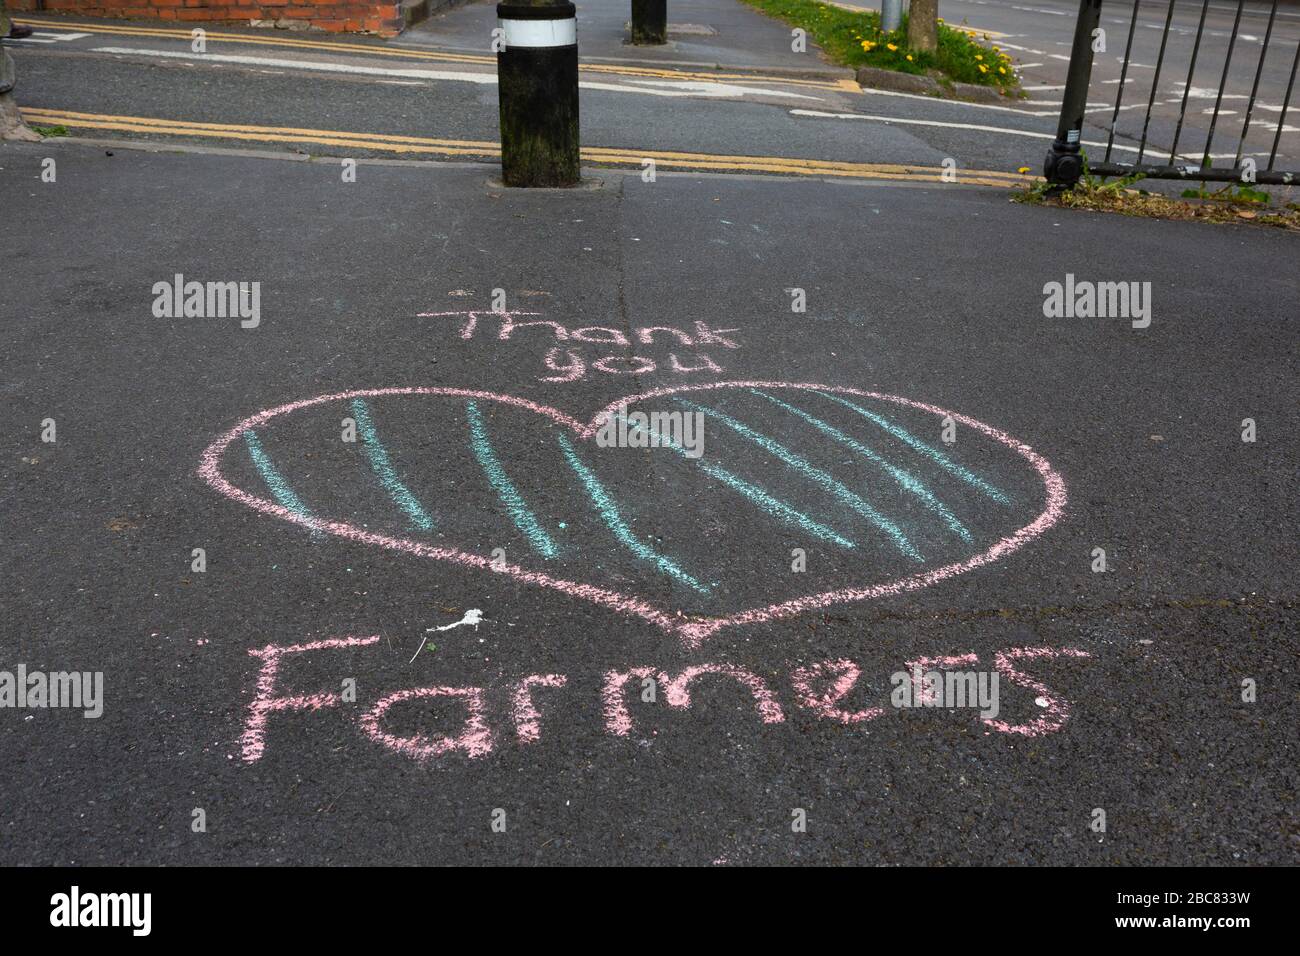 Carmarthen, UK. 3 April, 2020. Child's chalk graffiti on pavement saying Thank You Farmers as part of Clap for Carers initiative during Coronavirus pandemic lockdown in Wales, UK. Credit: Gruffydd Ll. Thomas/Alamy Live News Stock Photo